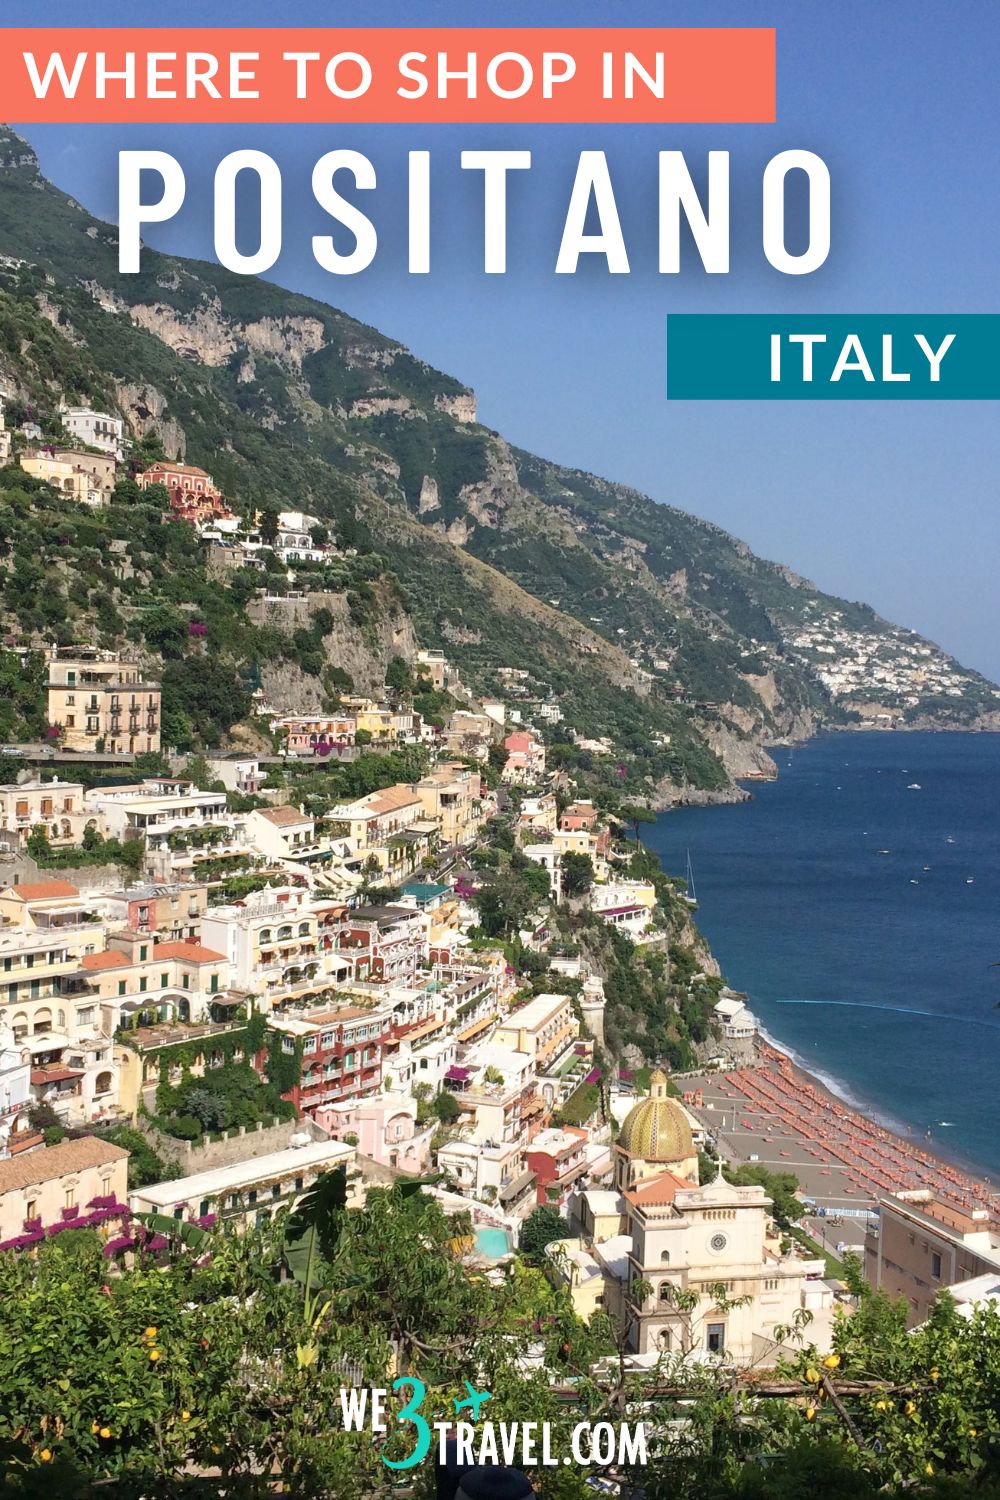 Where to shop in Positano Italy on the Amalfi Coast for household goods, clothing, and shoes